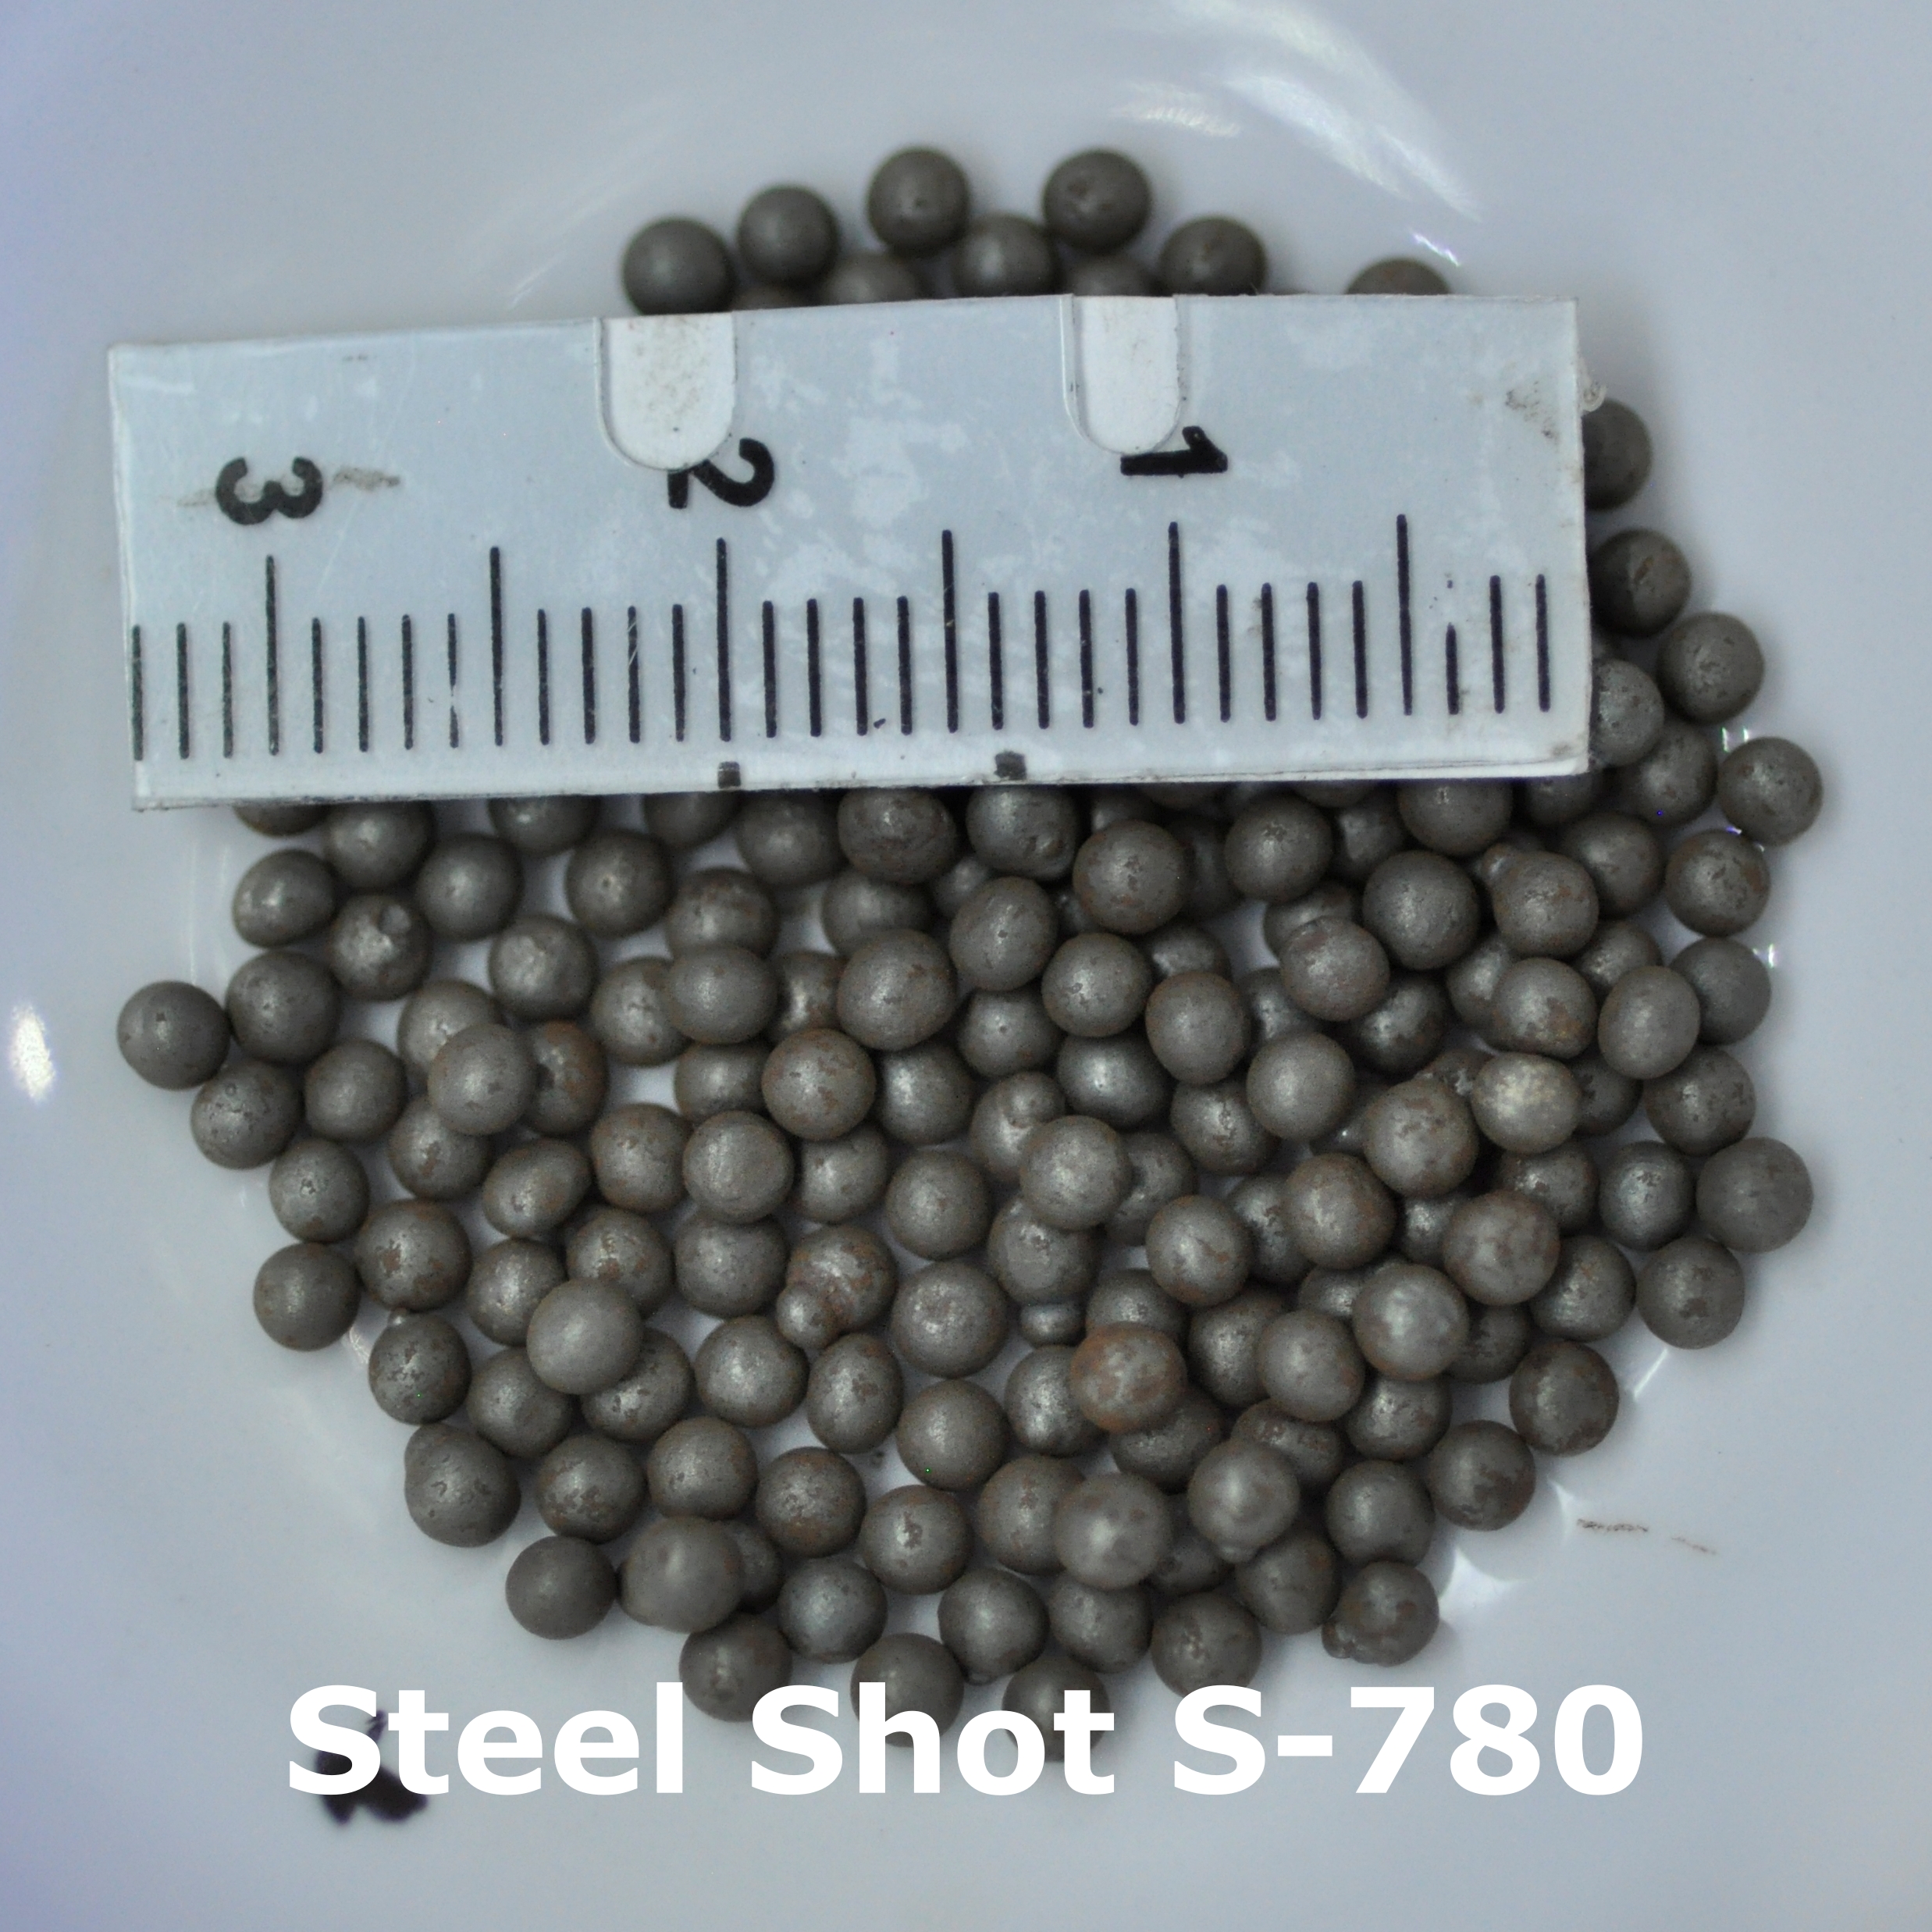 S-780/SH-240
Size 2.5mm